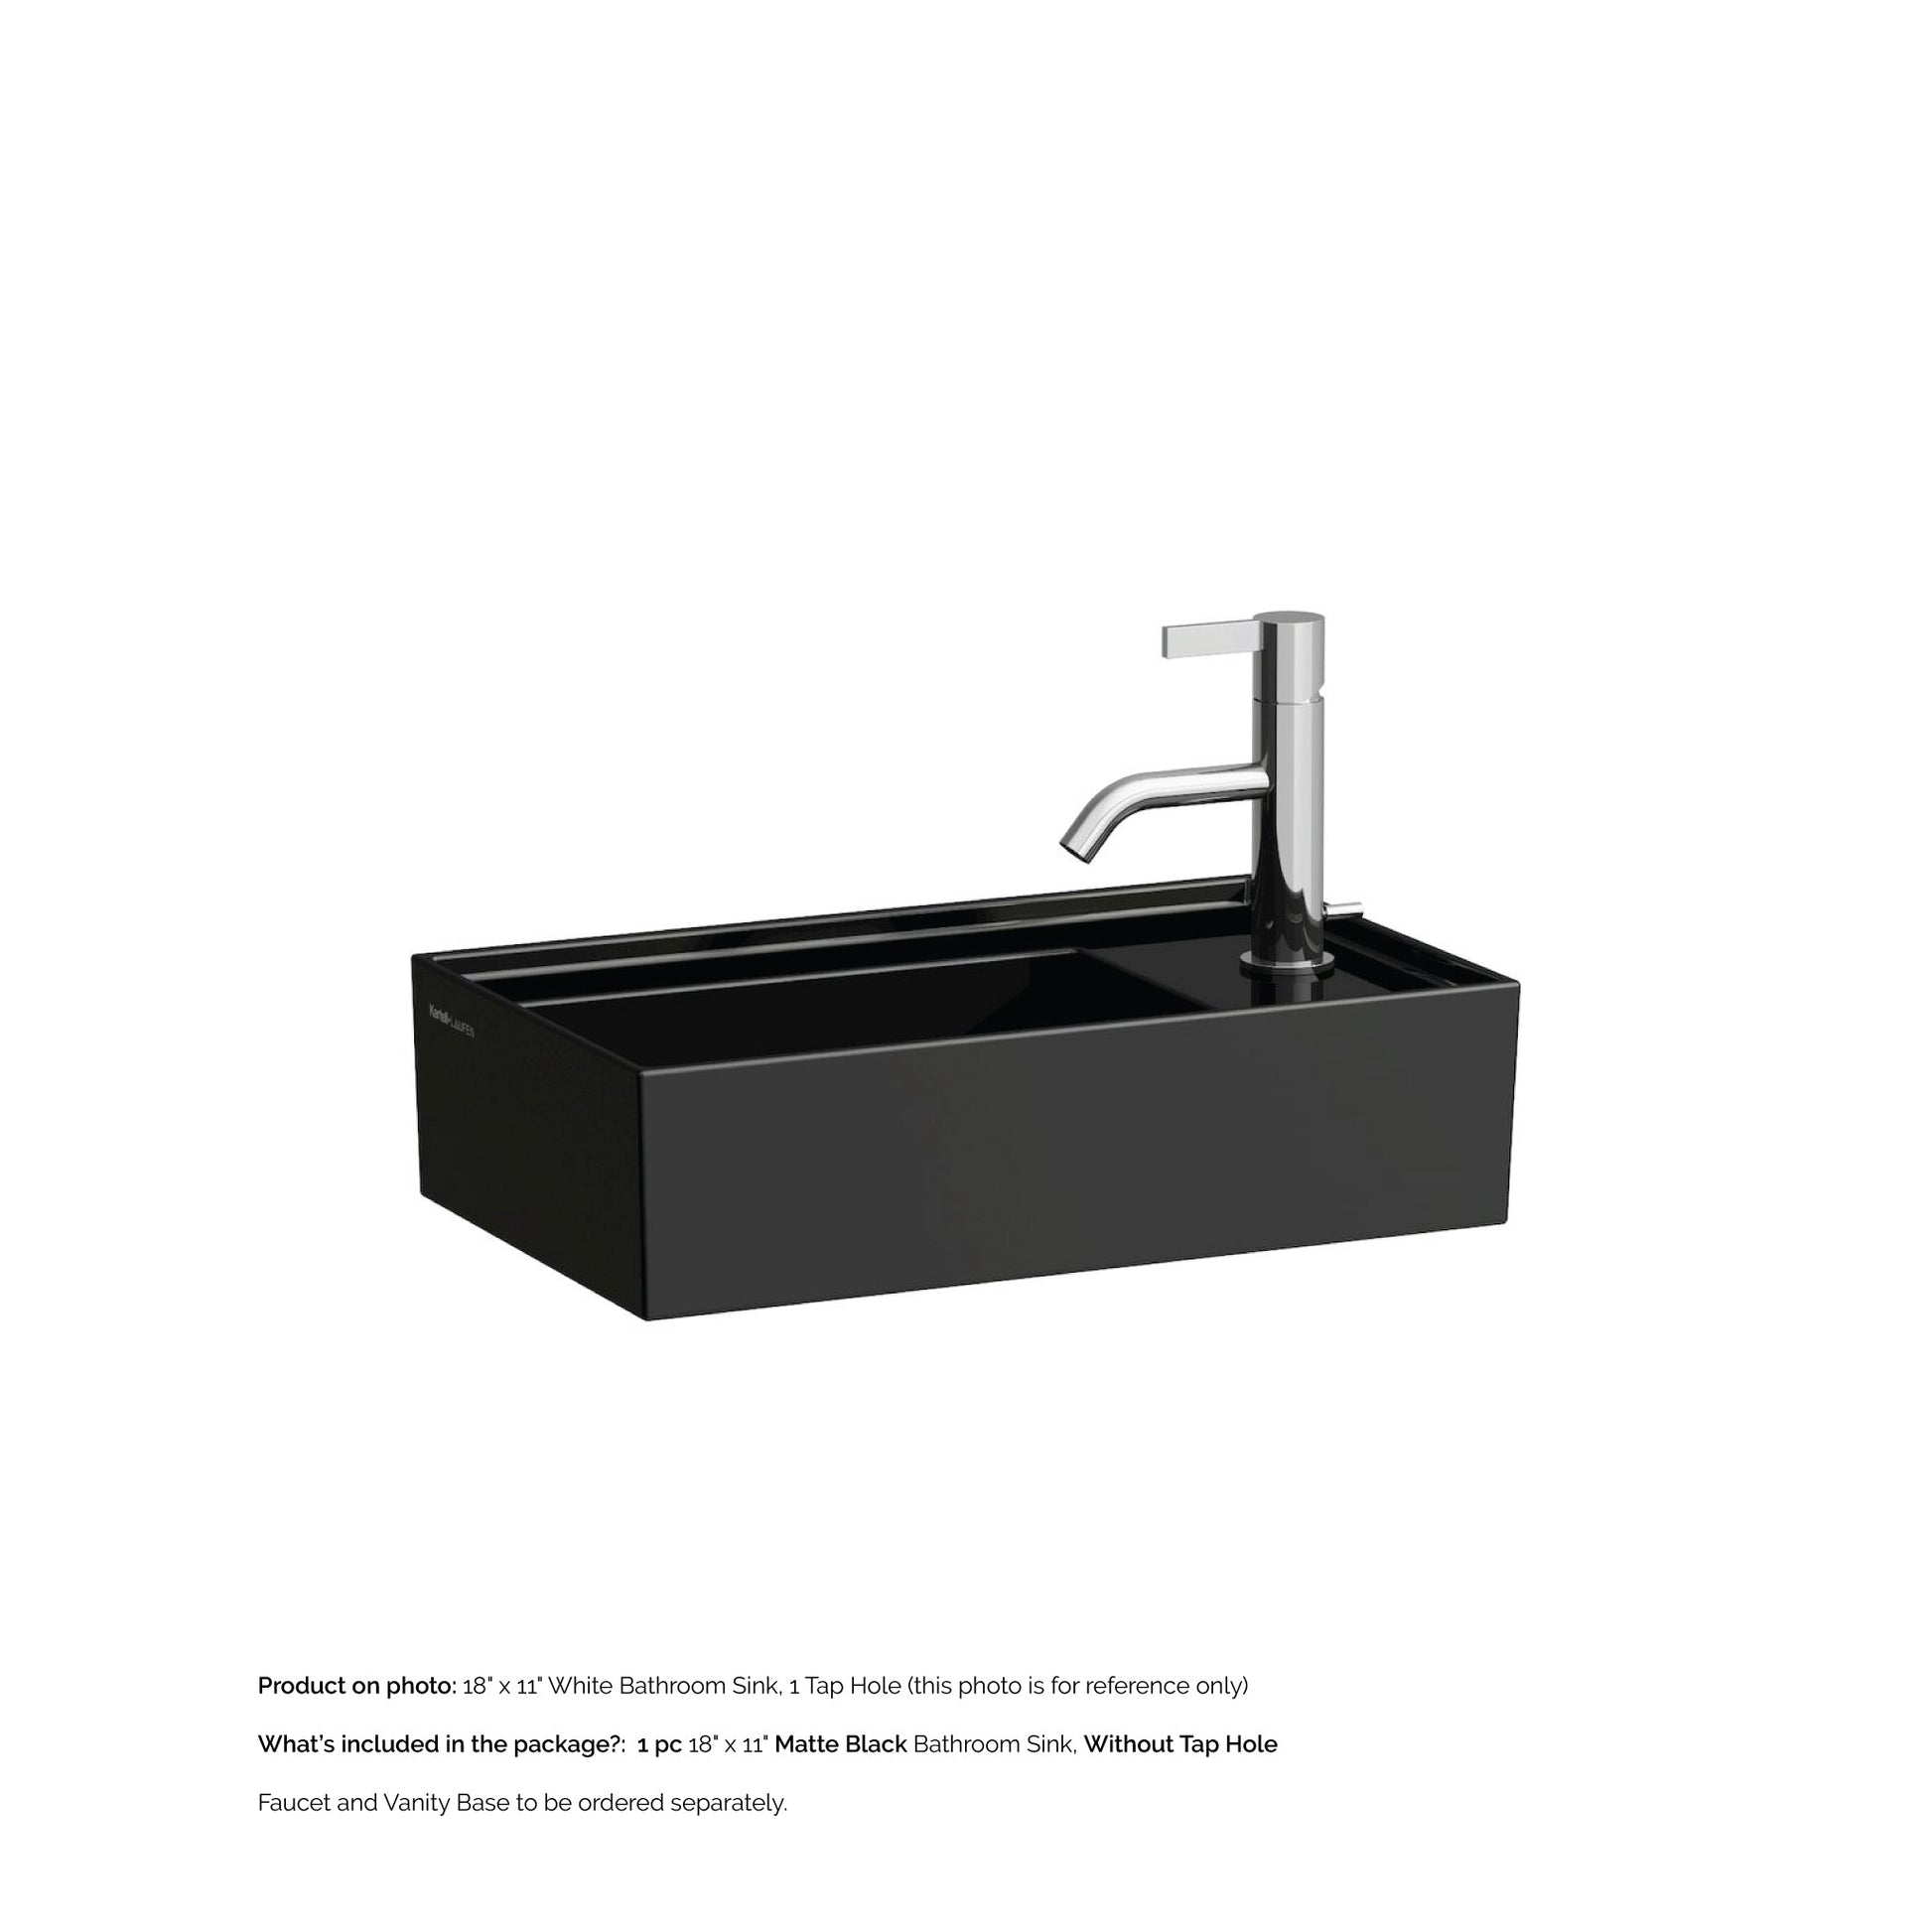 https://usbathstore.com/cdn/shop/products/Laufen-Kartell-18-x-11-Matte-Black-Wall-Mounted-Tap-Bank-Right-Bathroom-Sink-Without-Faucet-Hole.jpg?v=1674248109&width=1946